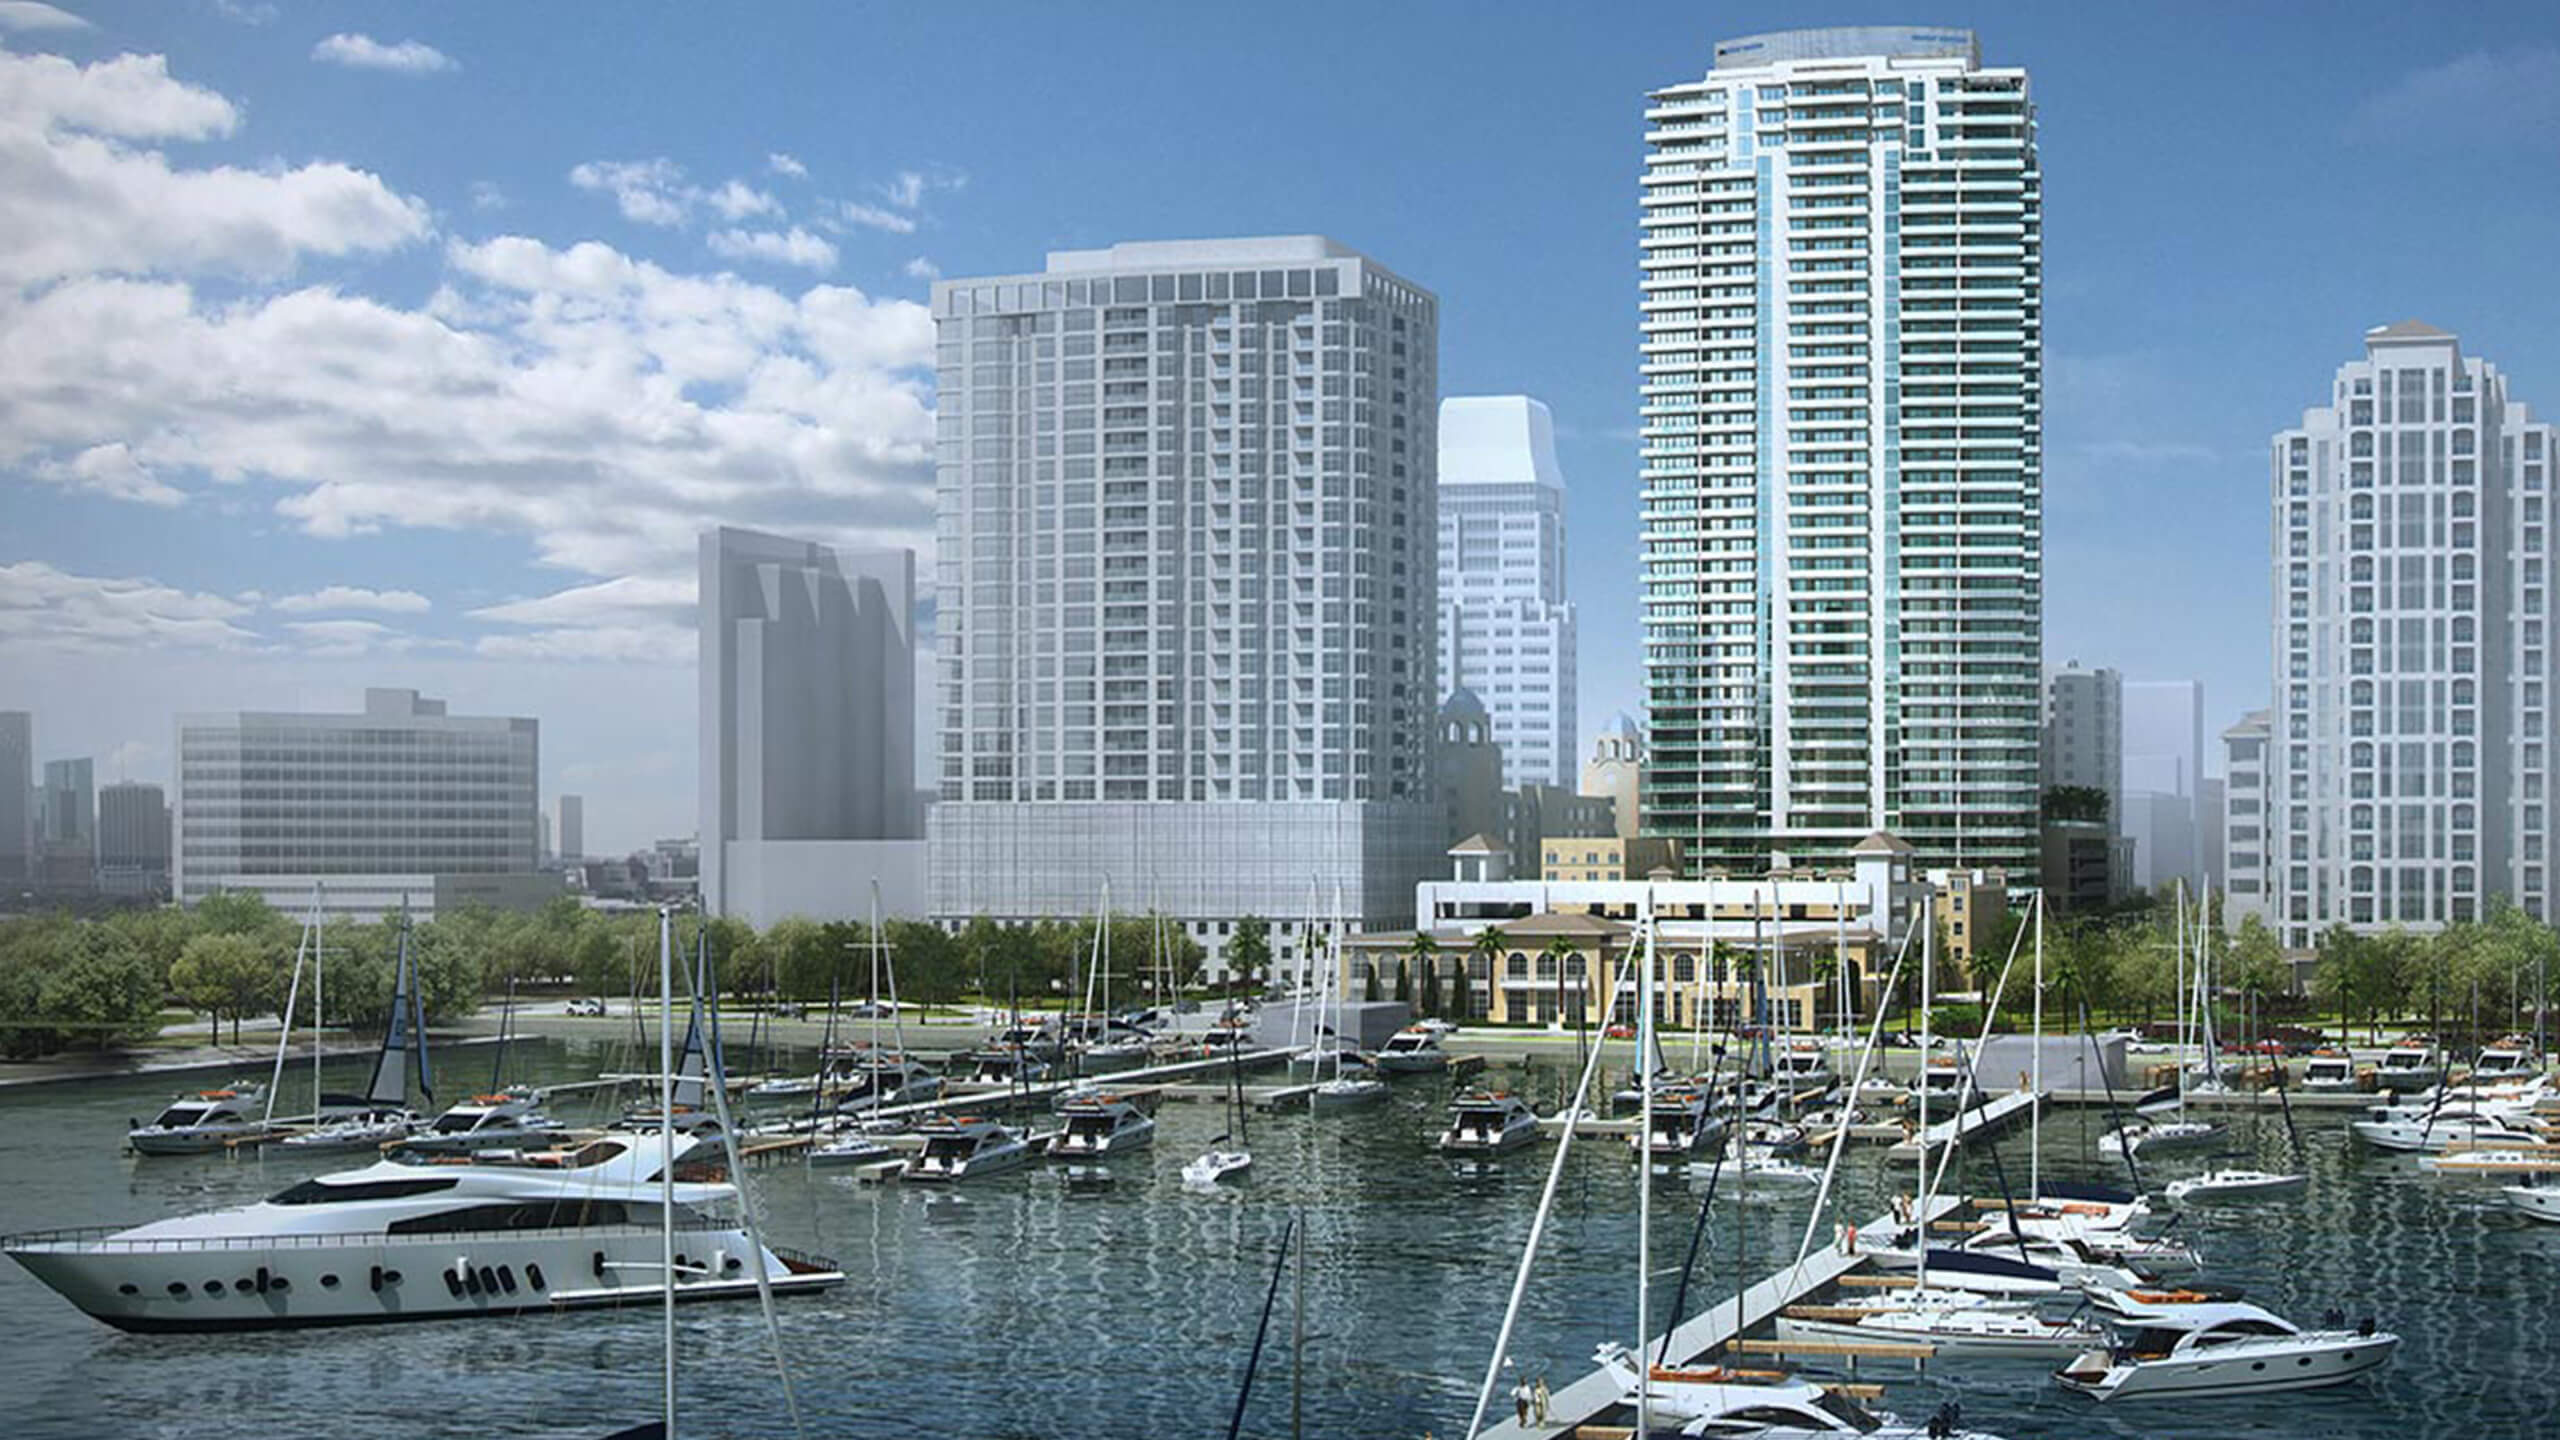 Power Design, Inc. Partners on Future Tallest High Rise in Pinellas County